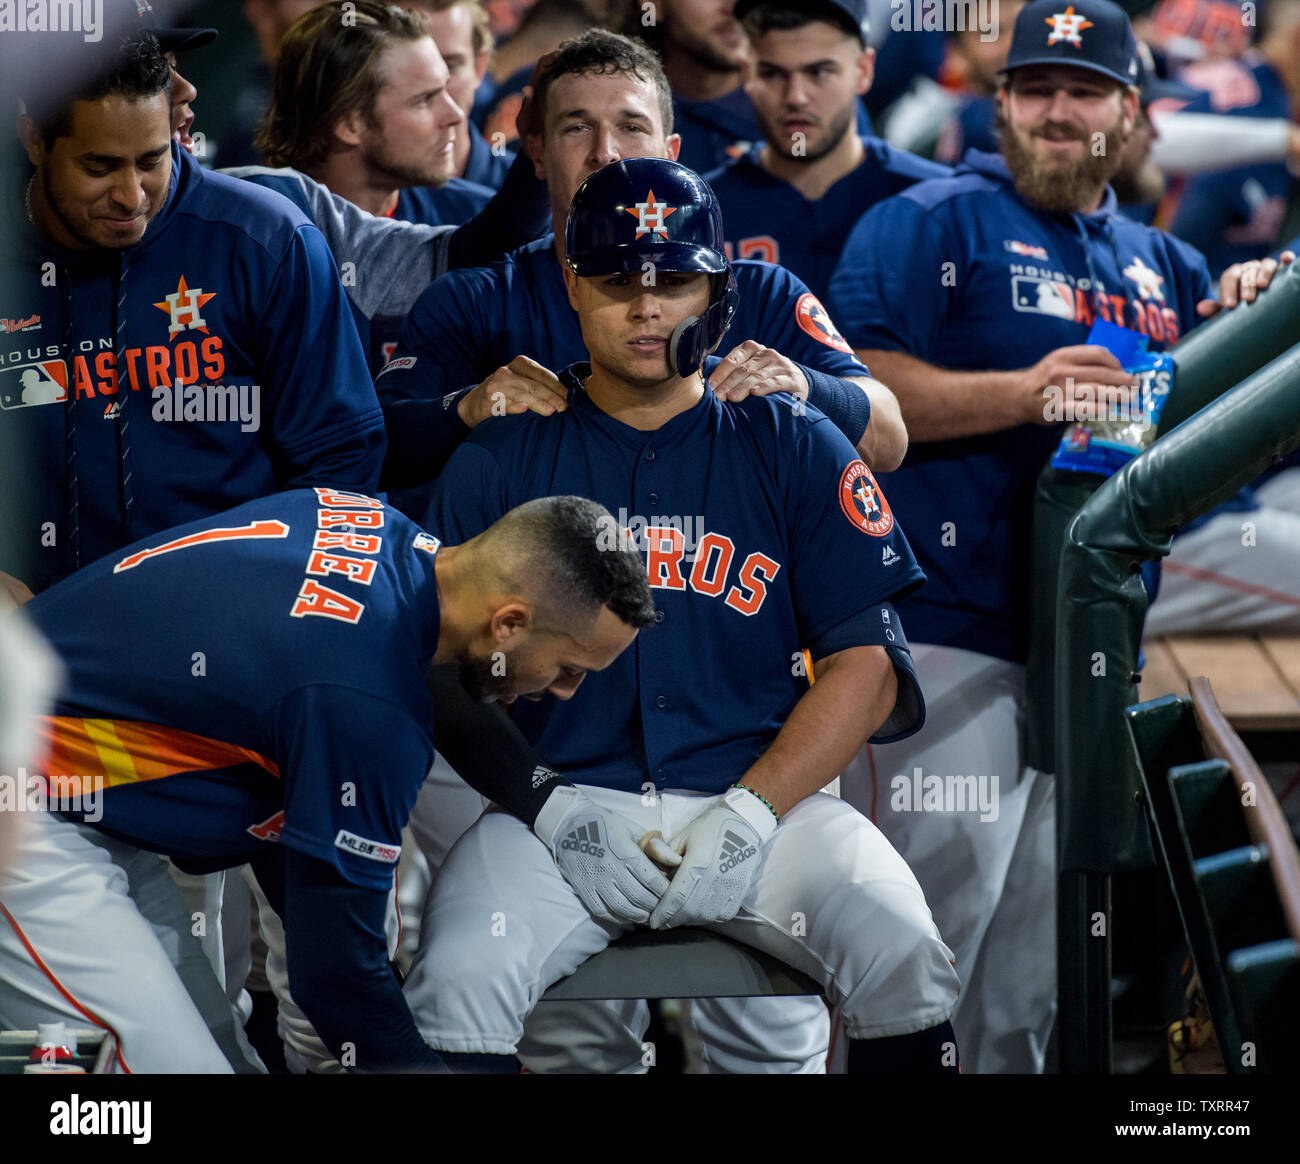 Houston Astros first baseman Aledmys Diaz receives a celebratory massage  from teammates Alex Bregman and Carlos Correa after hitting a three-run  home run against the Oakland Athletics in the 1st inning at